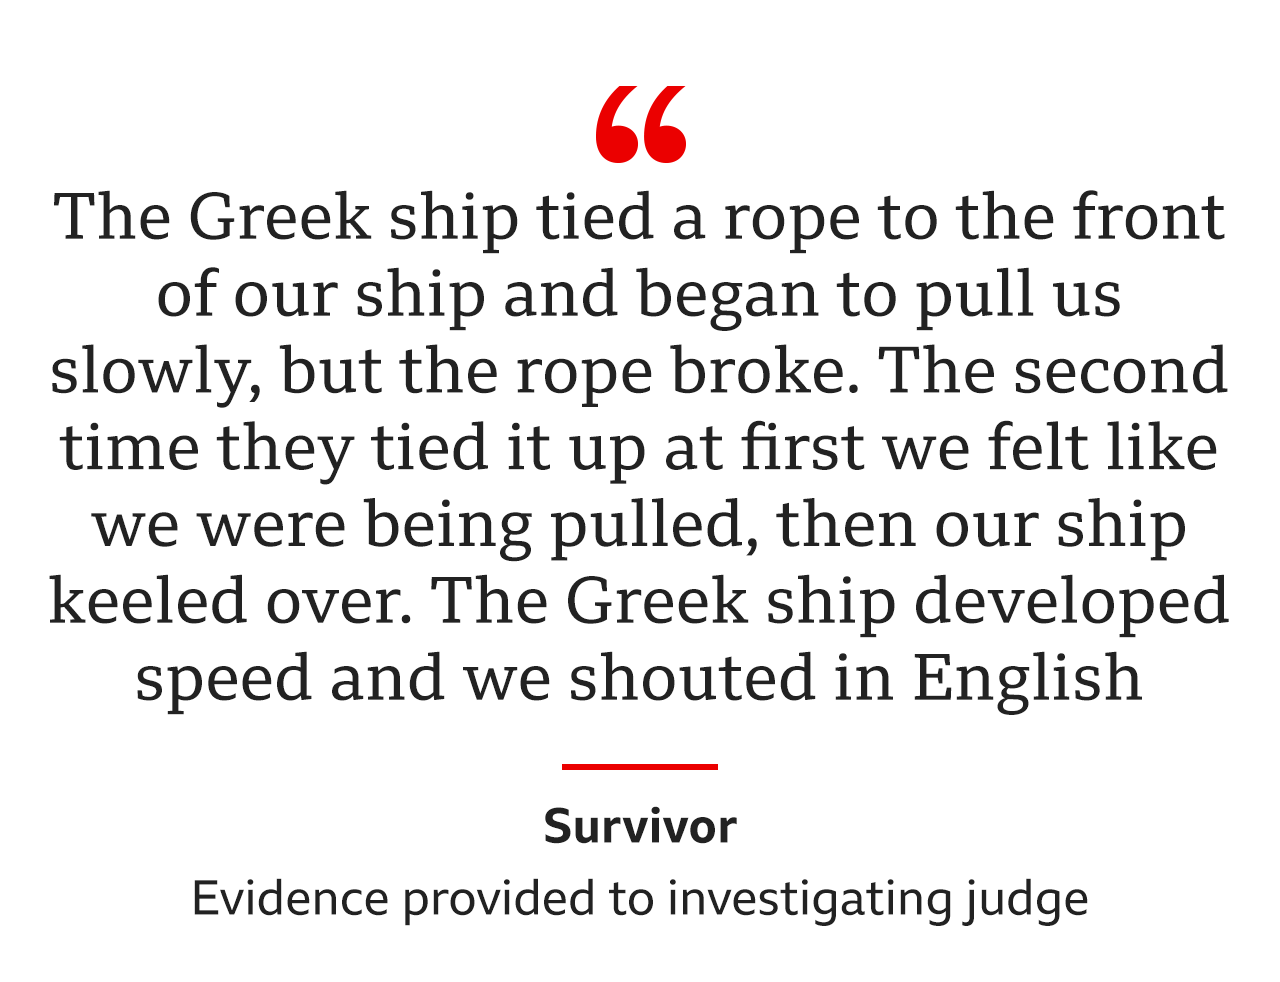 "The Greek ship tied a rope to the front of our ship and began to pull us slowly, but the rope broke… The second time they tied it up at first we felt like we were being pulled, then our ship keeled over. The Greek ship developed speed and we shouted in English," was the evidence from the same survivor to an investigating judge